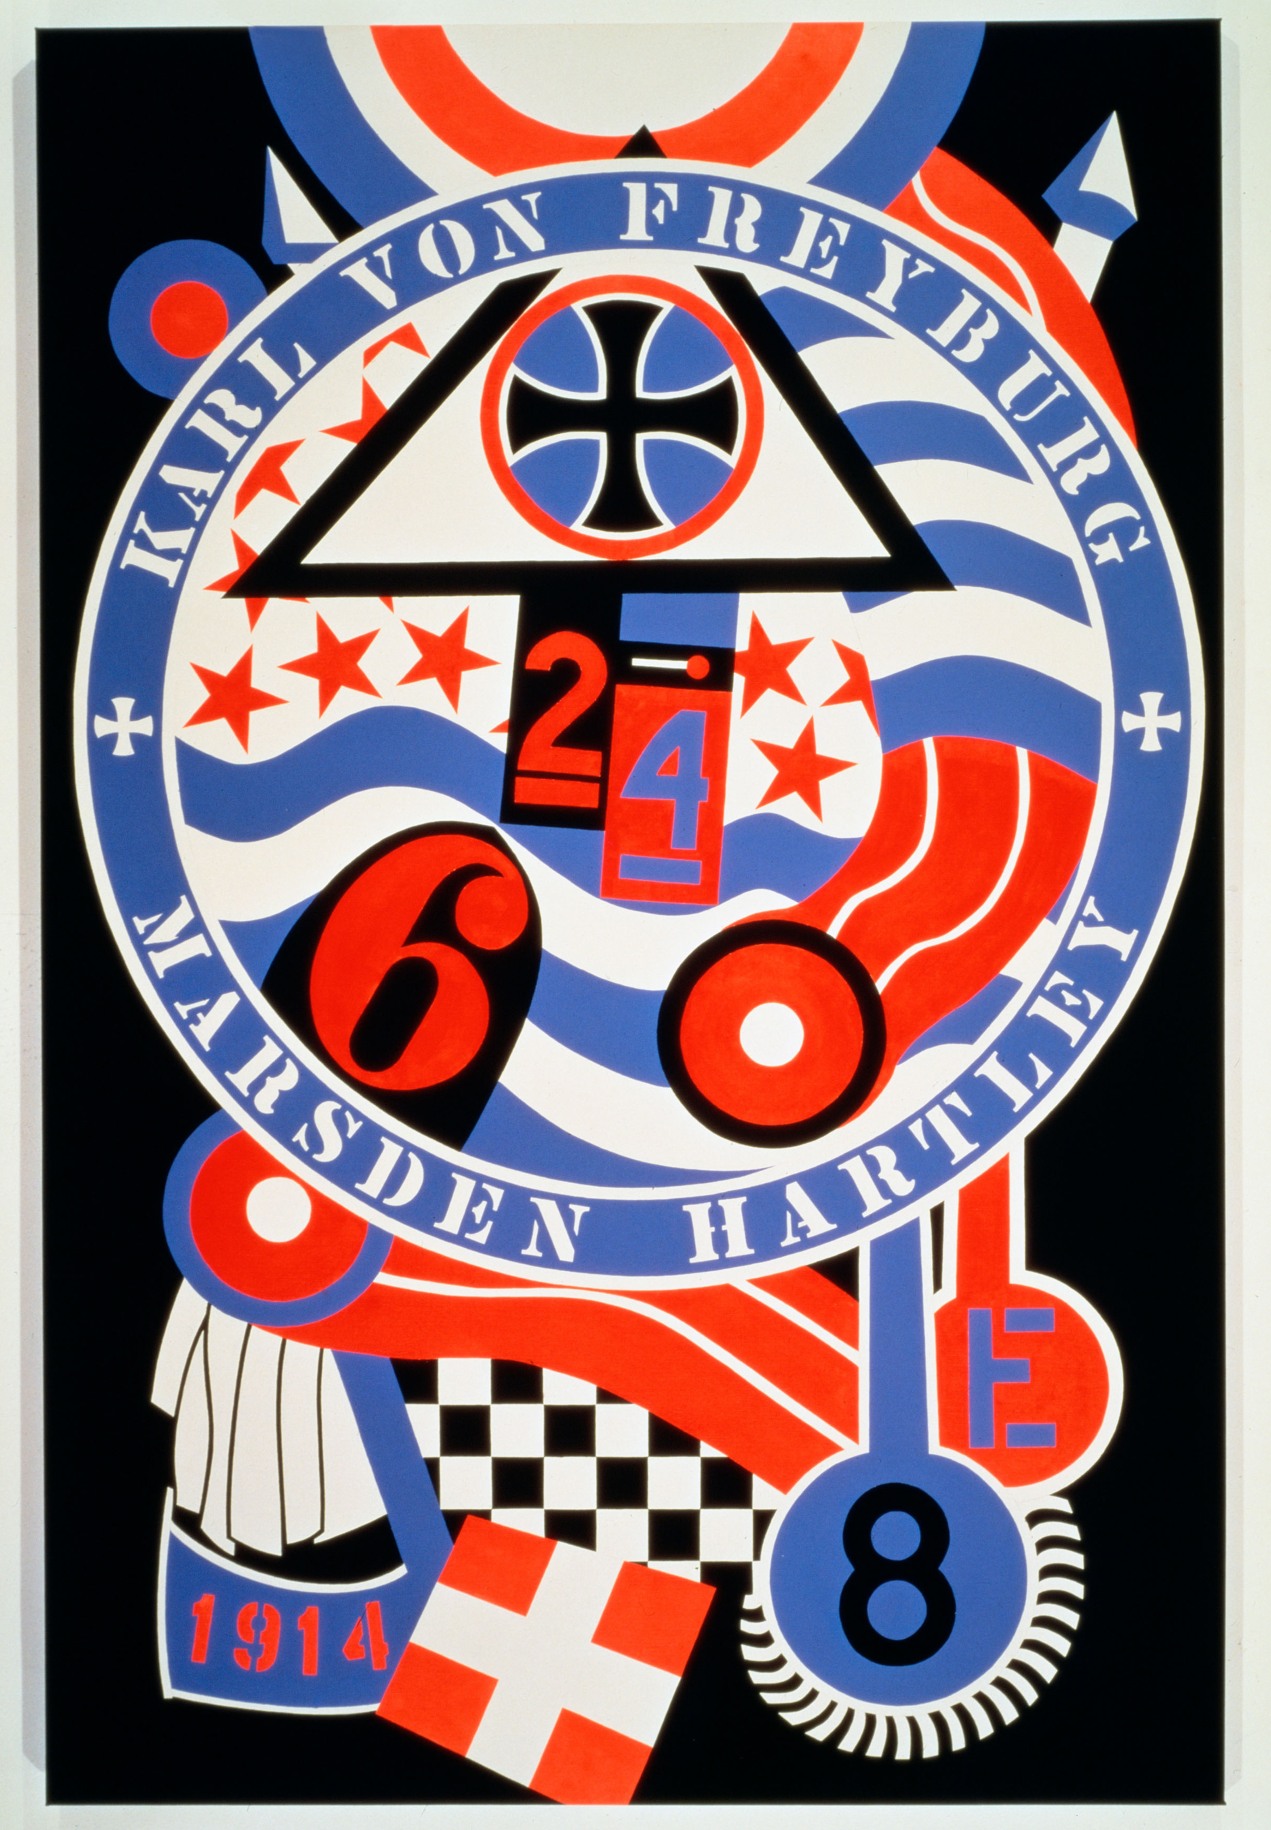 KvF II (Hartley Elegy), a 77 by 51 inch painting with a black ground. The other colors used in the painting are blue, red, and white. A circle surrounded by a blue ring with text dominates the upper two thirds of the canvas. In the upper half of the ring &quot;Karl von Freyburg&quot; has been painted in white stenciled letters, and in the lower half &quot;Marsden Hartley.&quot; Within the circle is a black iron cross in a blue circle in a white triangle with a black outline, as well as other World War I motifs and references to the soldier Karl von Freyburg, including a red numeral six and the number 24, the 2 painted in red against black and the four in blue against red. More motifs and references appear in the bottom third of the painting, including the flag of St. George, the date 1914 in red on a blue background, a blue letter E in a red circle, and a black numeral 8 in a blue circle.